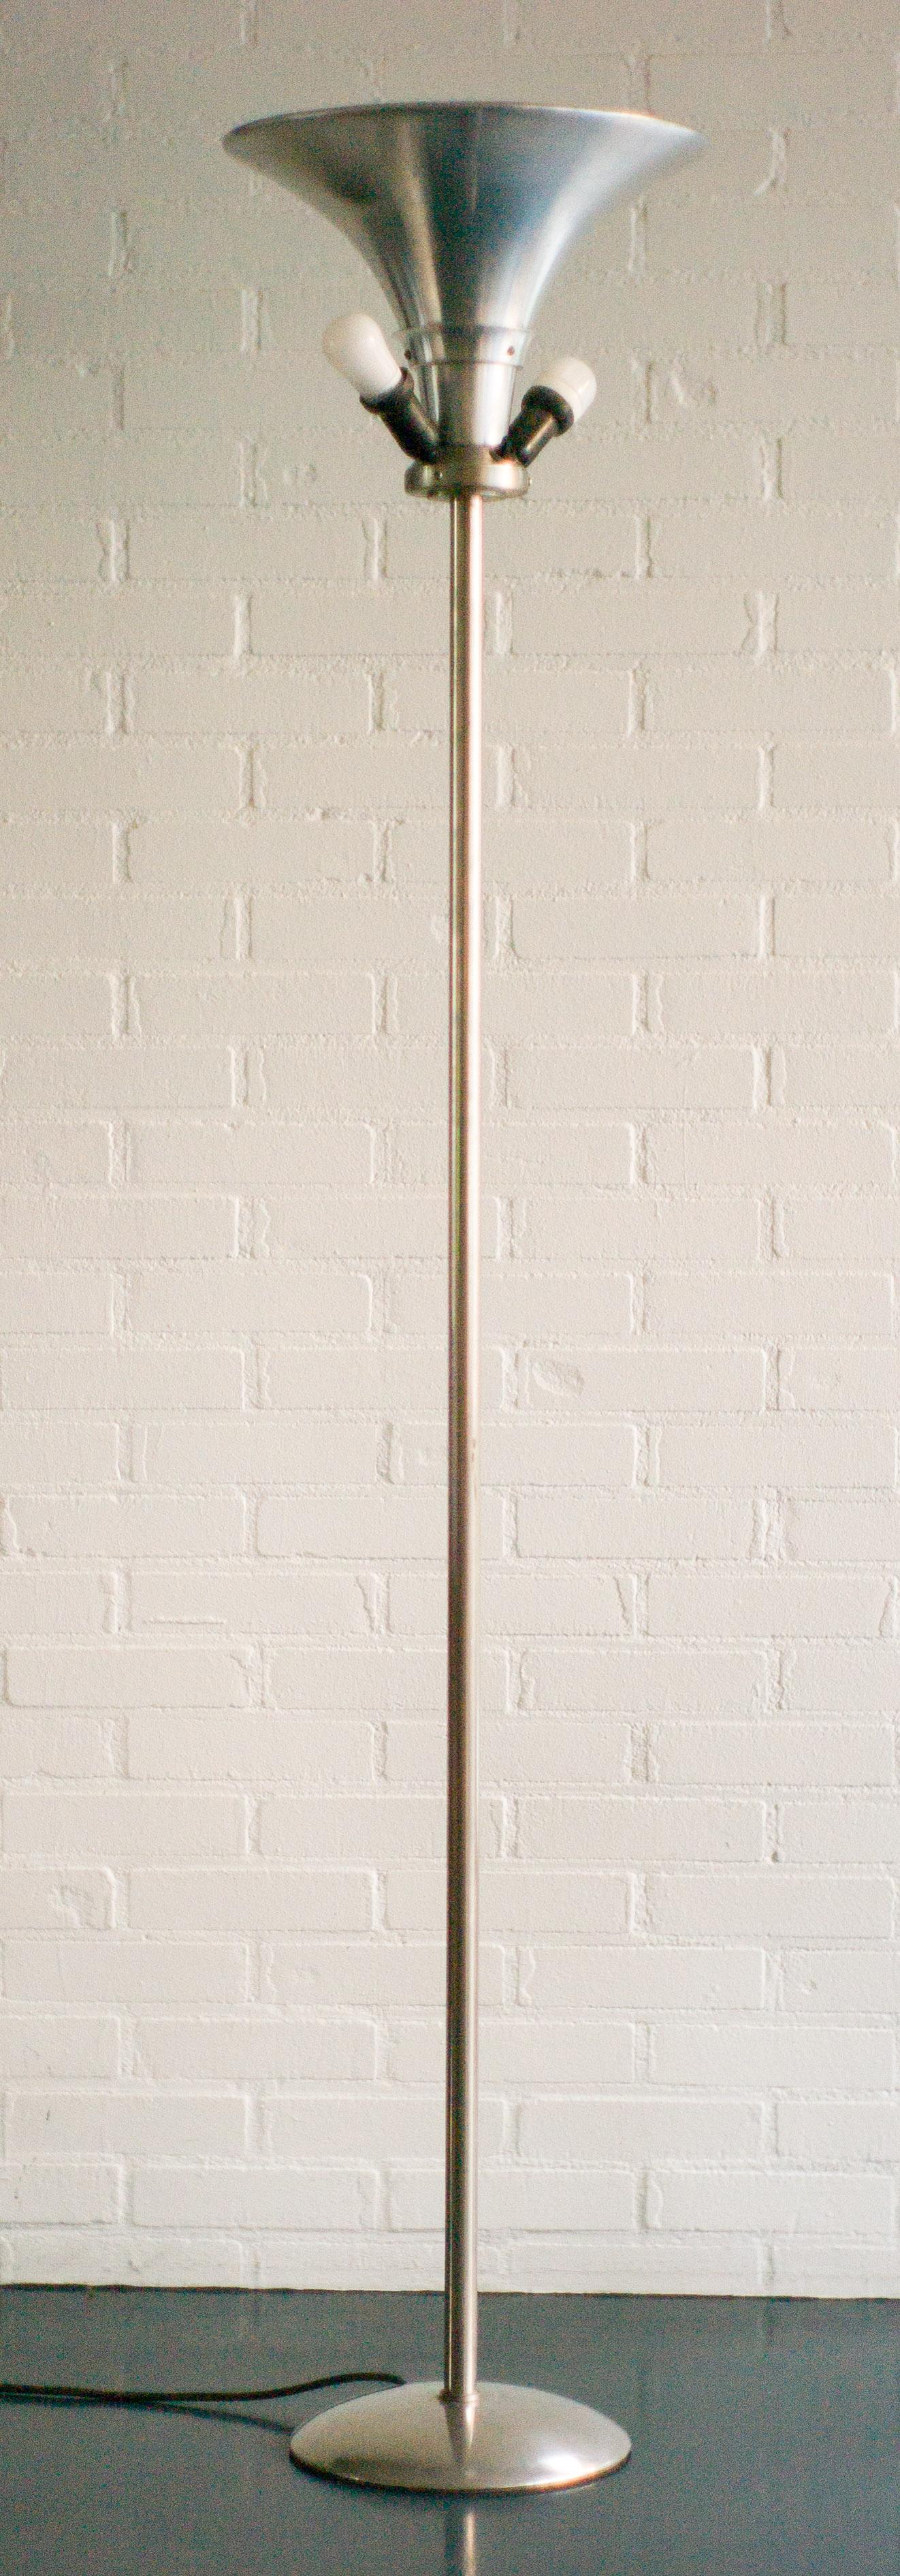 Mid-20th Century Giso Floor Lamp by Willem H. Gispen For Sale